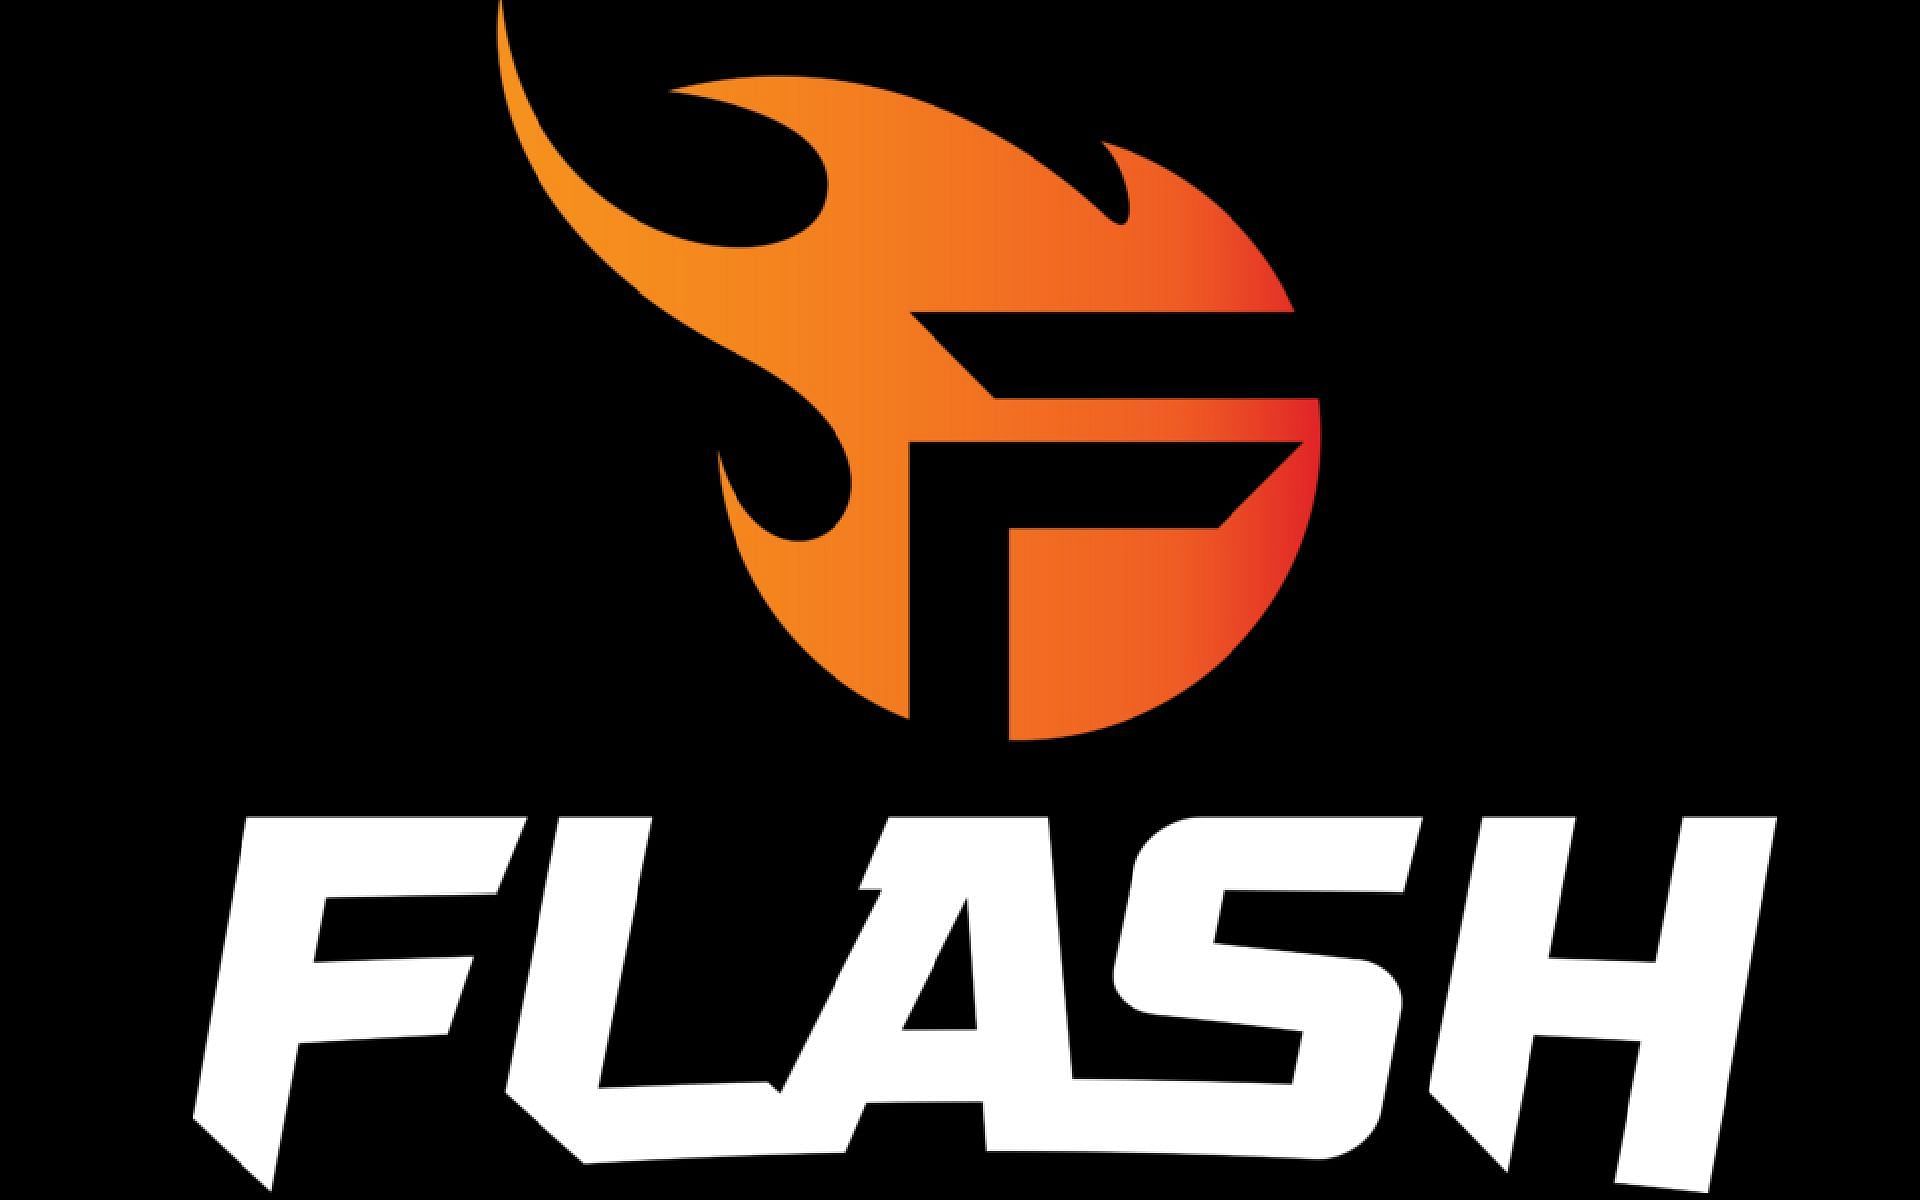 Will Team Flash qualify for the Quarterfinals and take their revenge on ONIC? (Image via Team Flash)